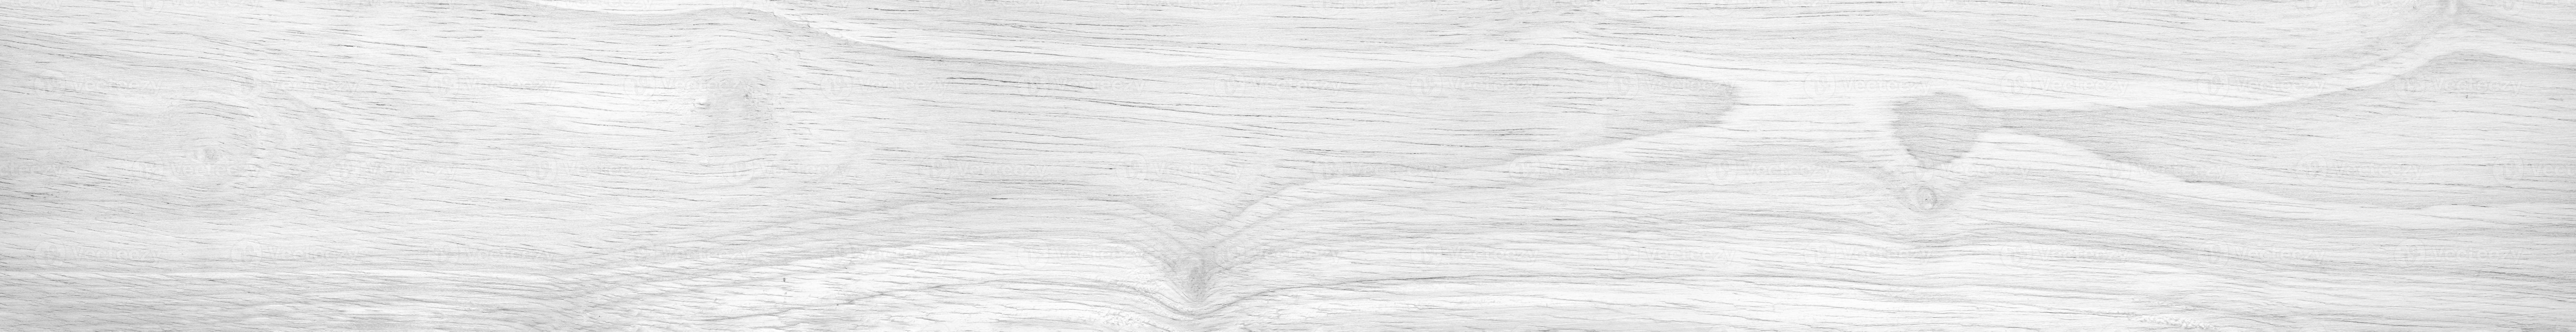 White wood surface natural texture background photo